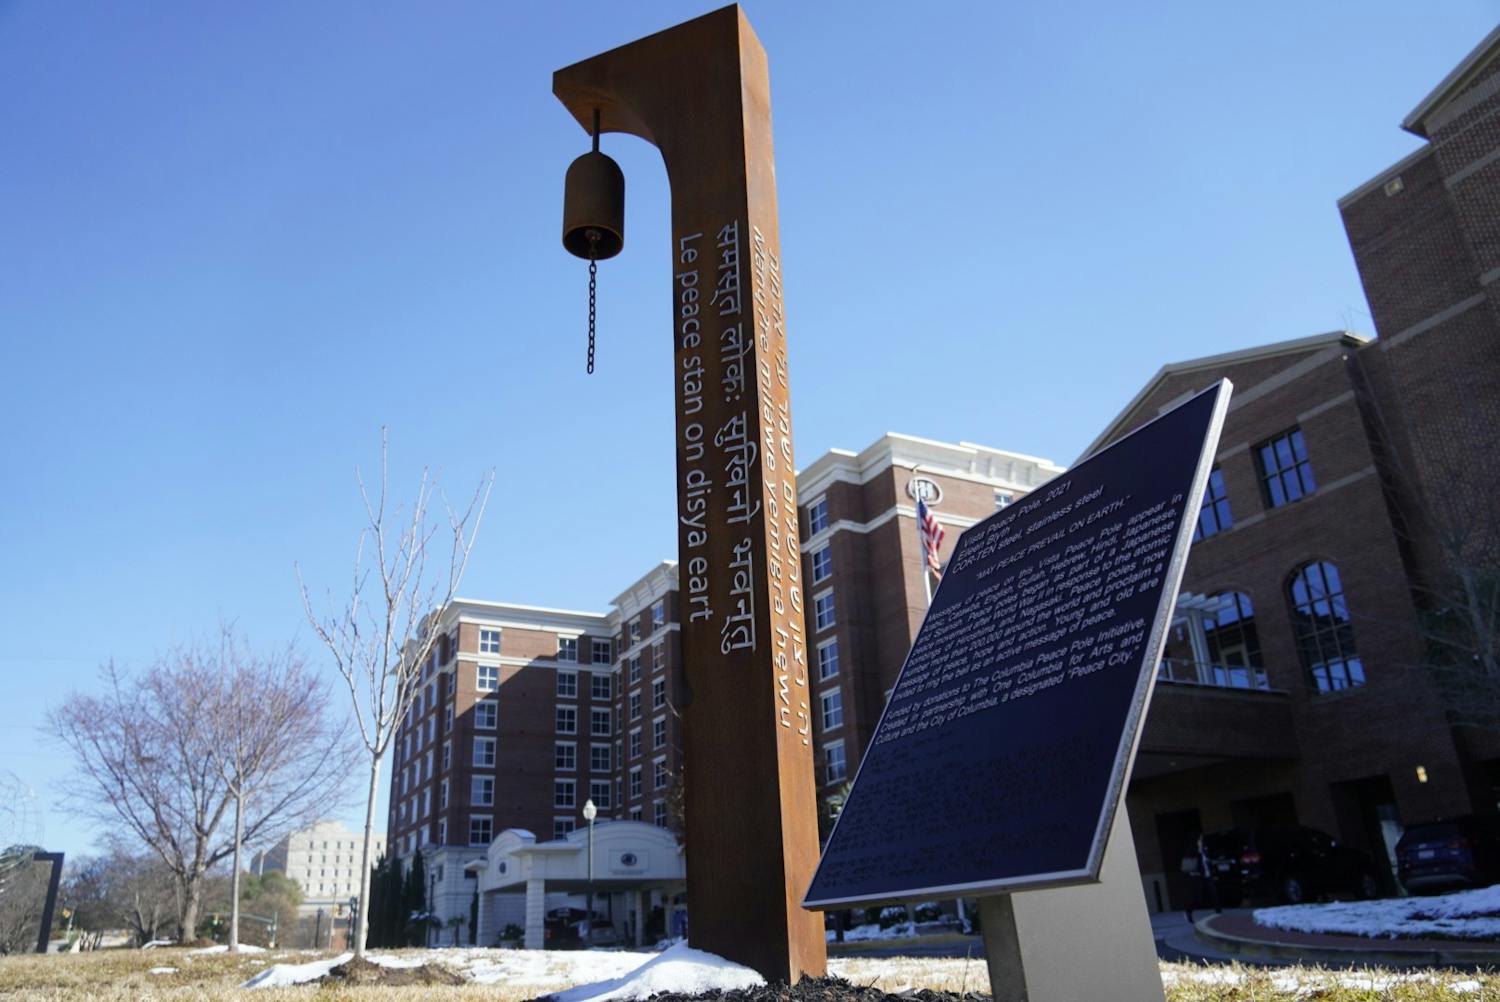 The Vista Peace Pole outside of the 鶹С򽴫ý Alumni Center on Jan. 22, 2022. The new public art installation promotes a message of peace in eight different languages in Columbia’s Vista district.